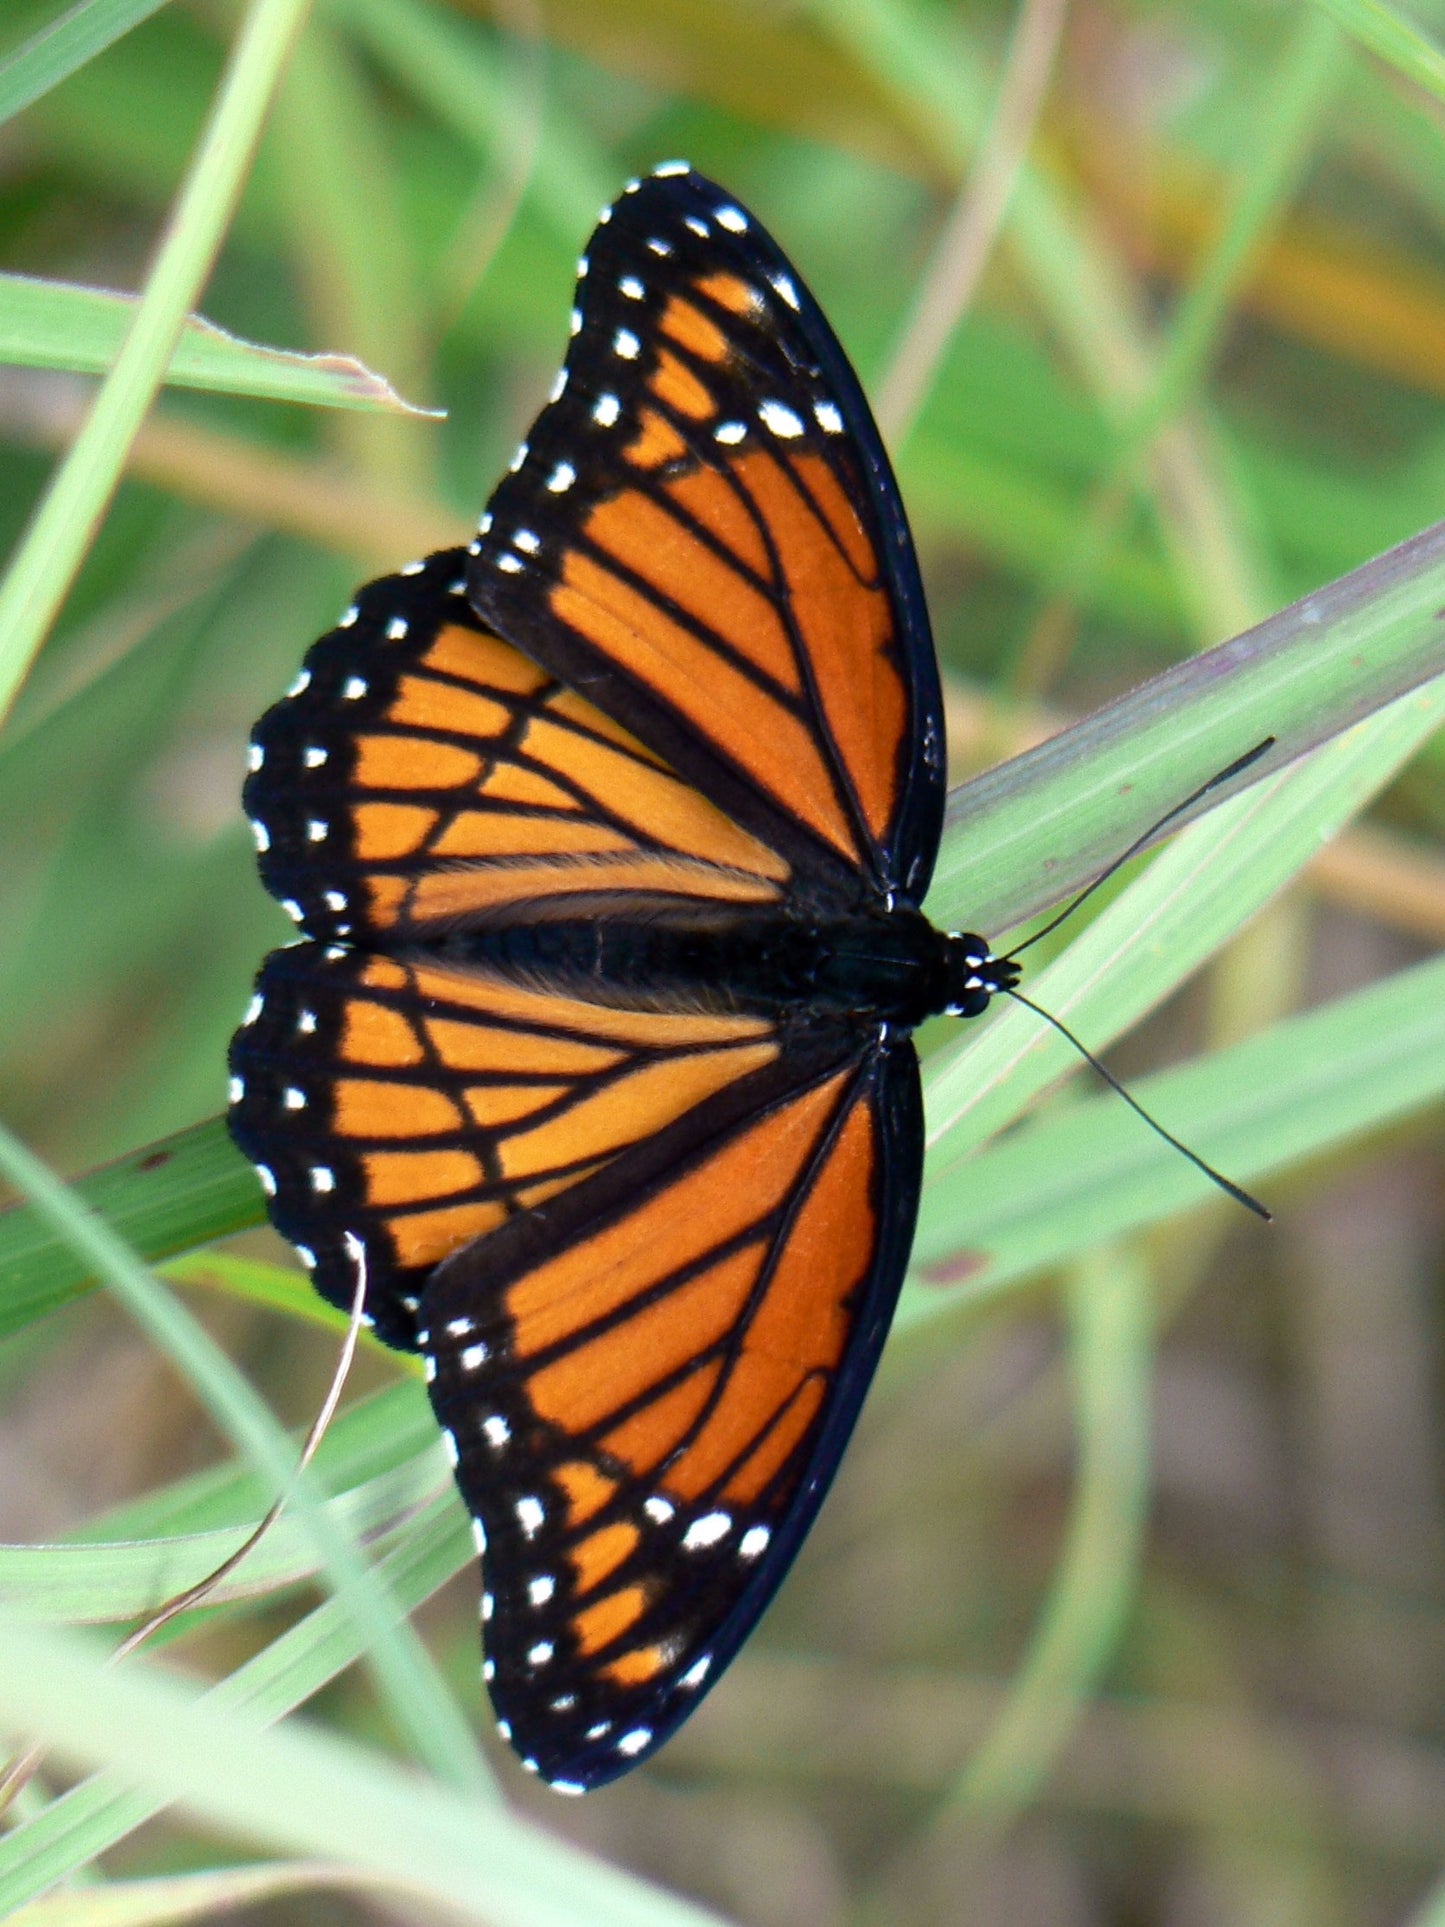 viceroy butterfly uses sails carolinensis as a host plant